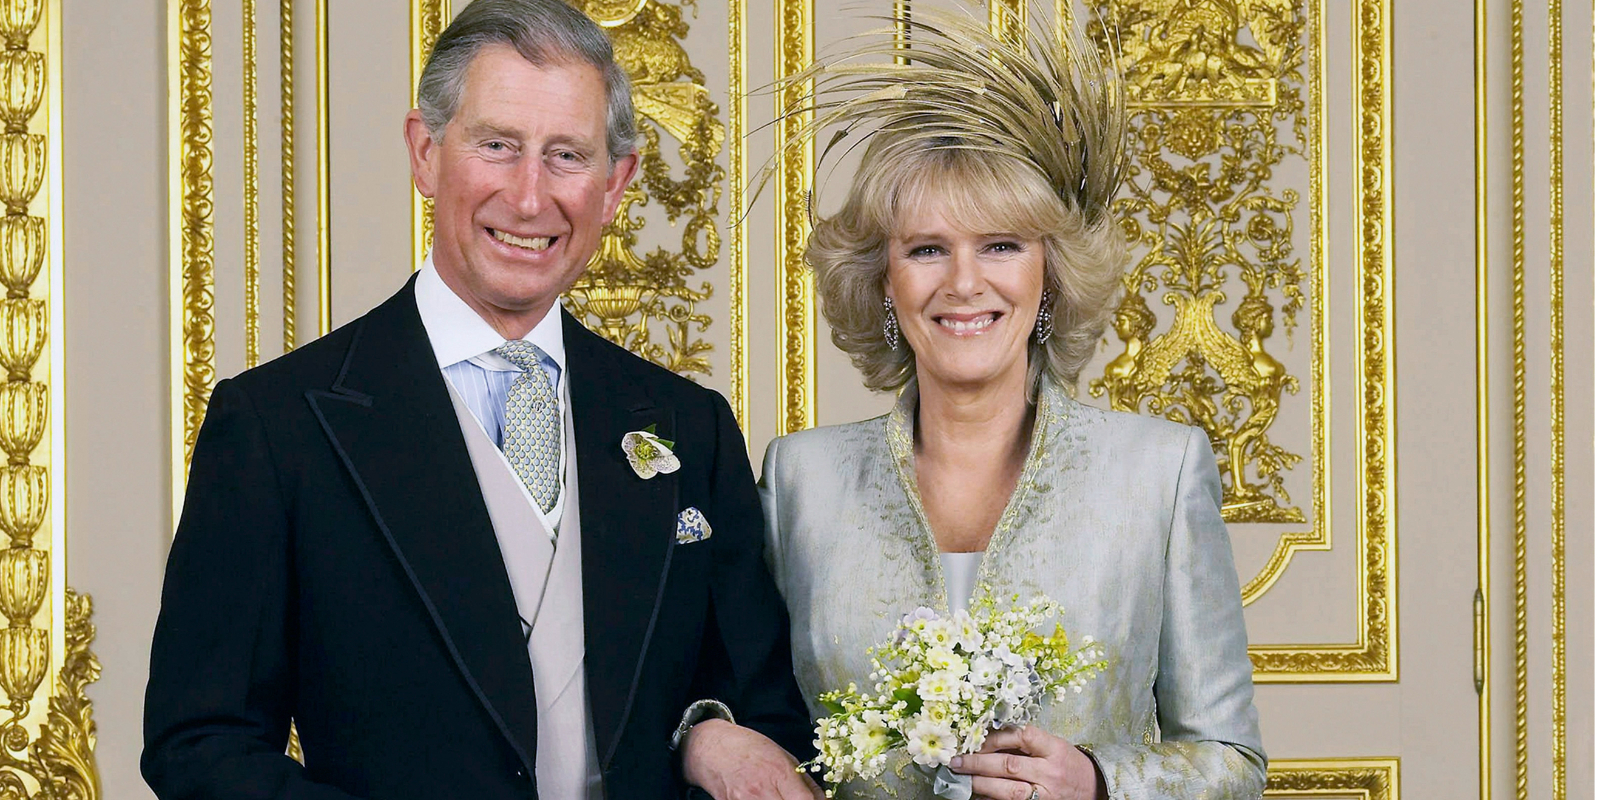 King Charles II and Camilla Parker Bowles on thier wedding day.